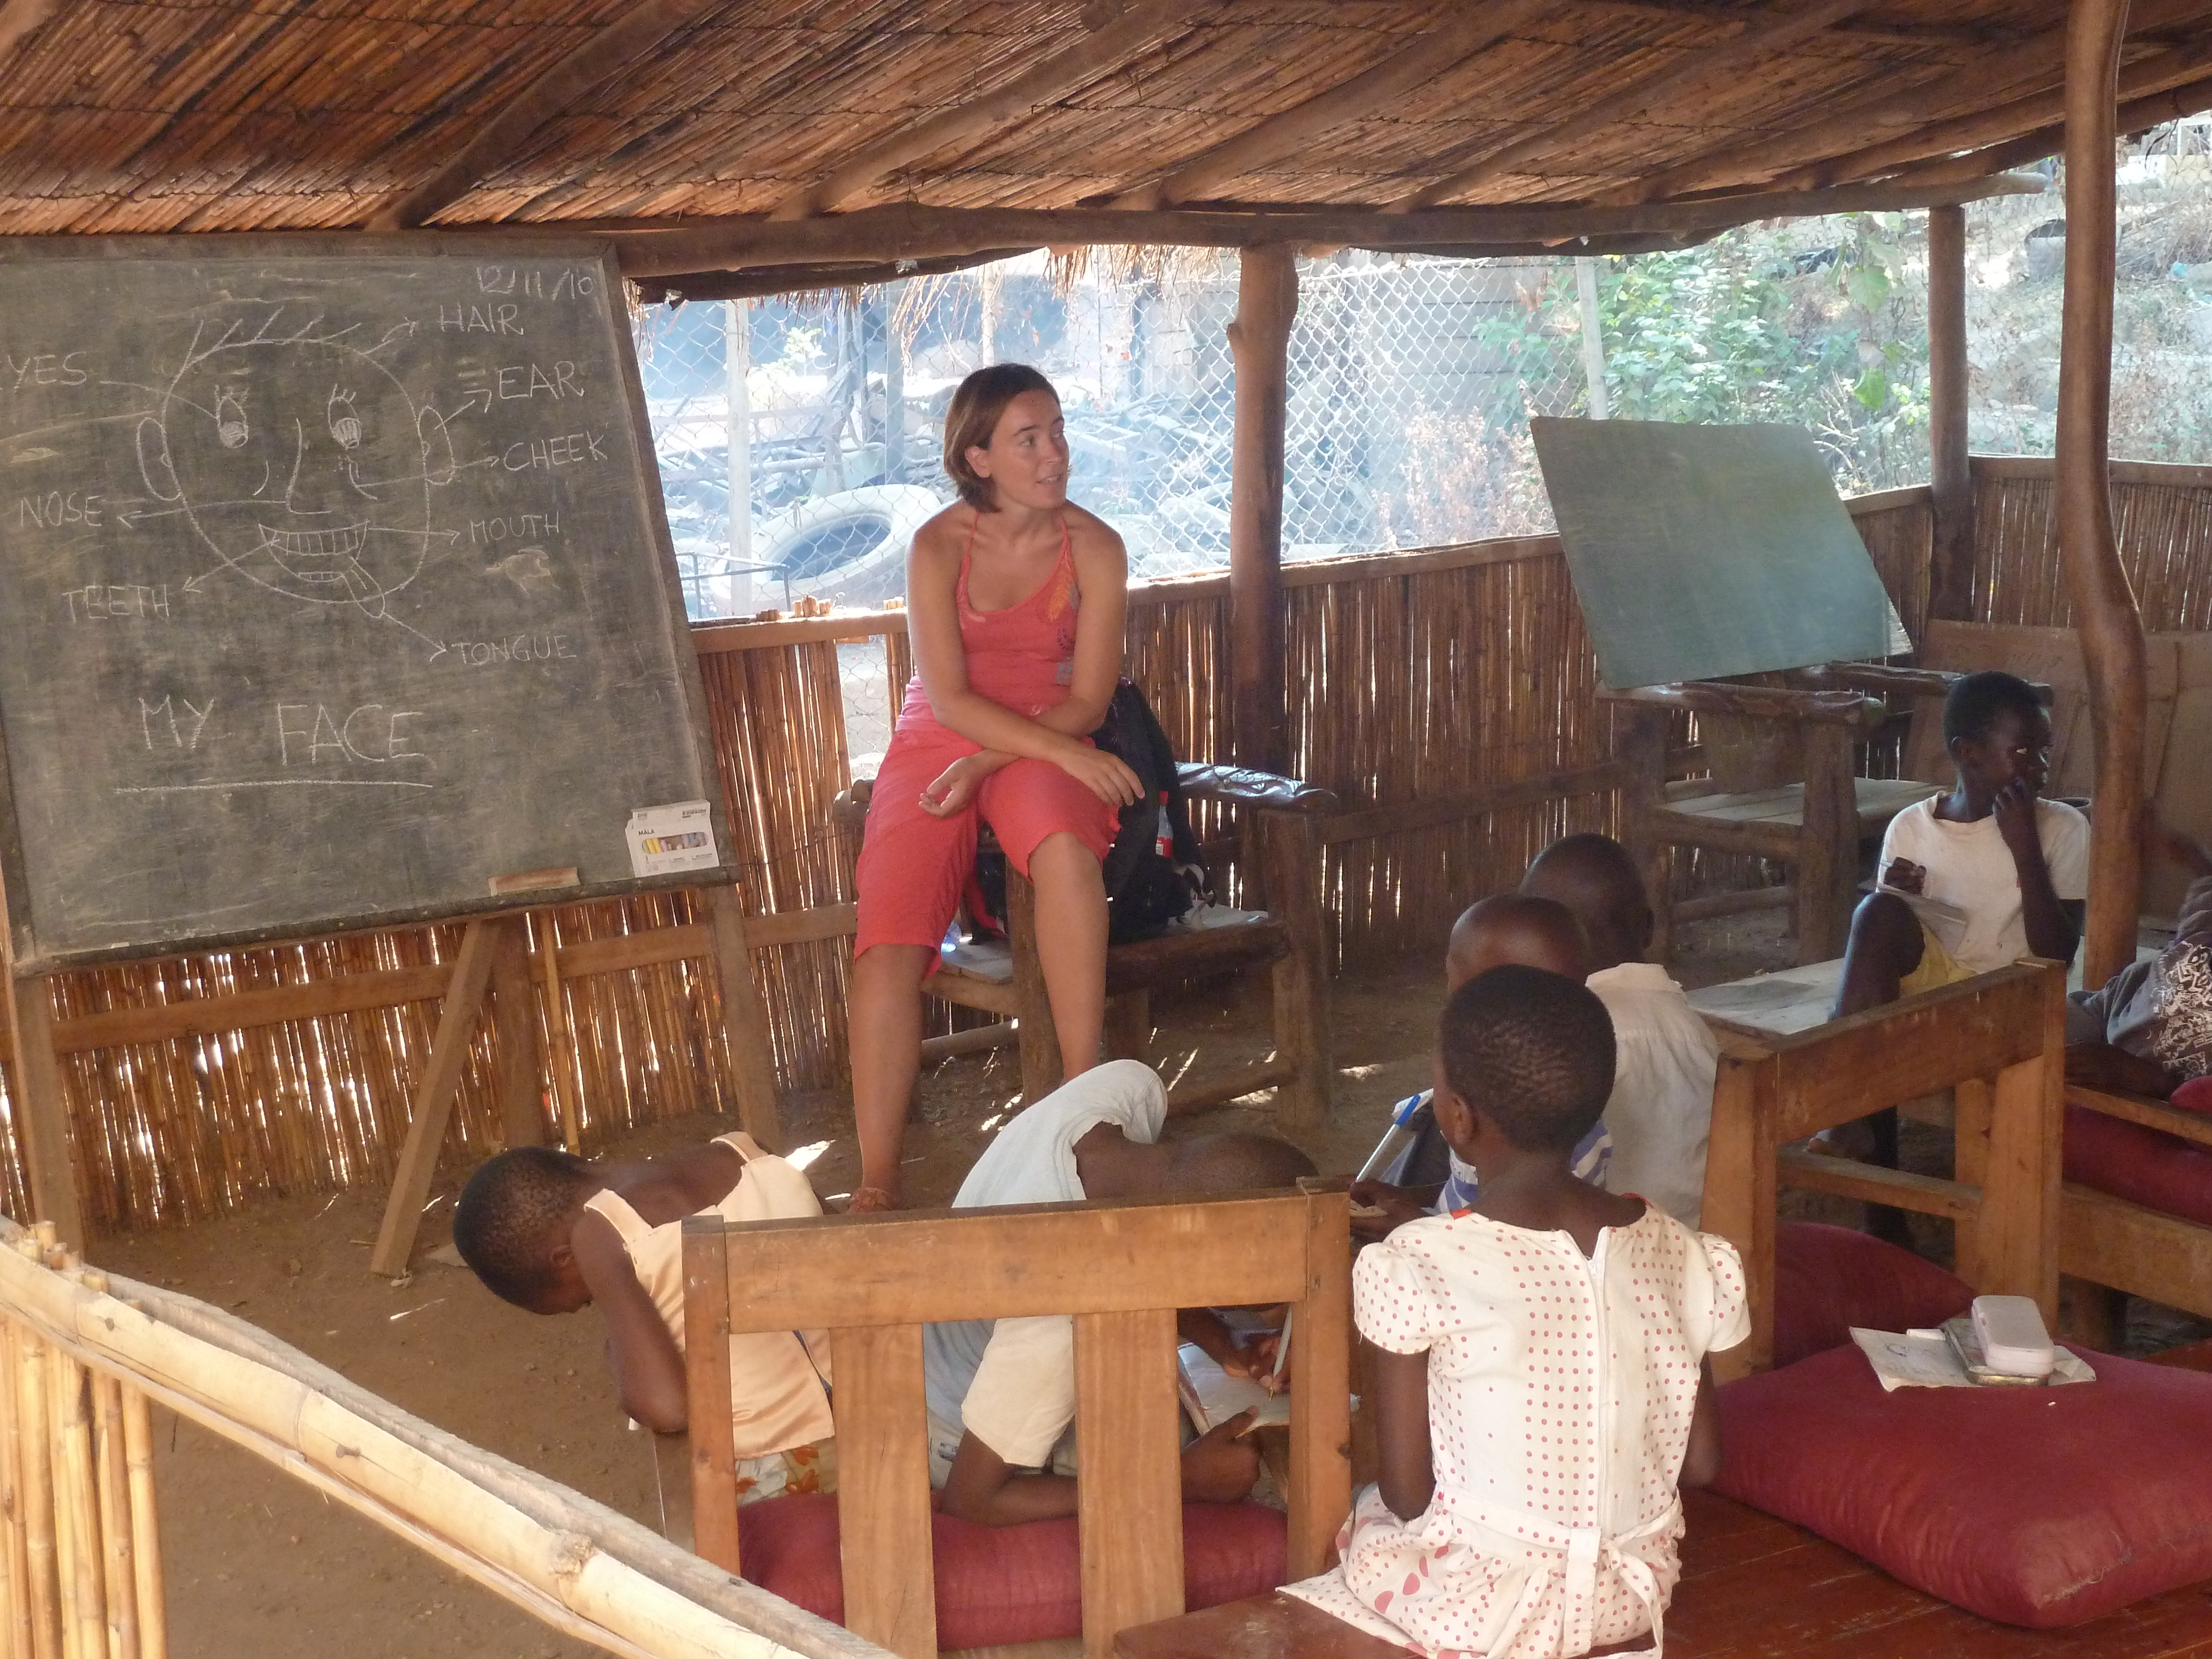 Shelter schools are often the only means for vulnerable children to stay off the road and get some basic education